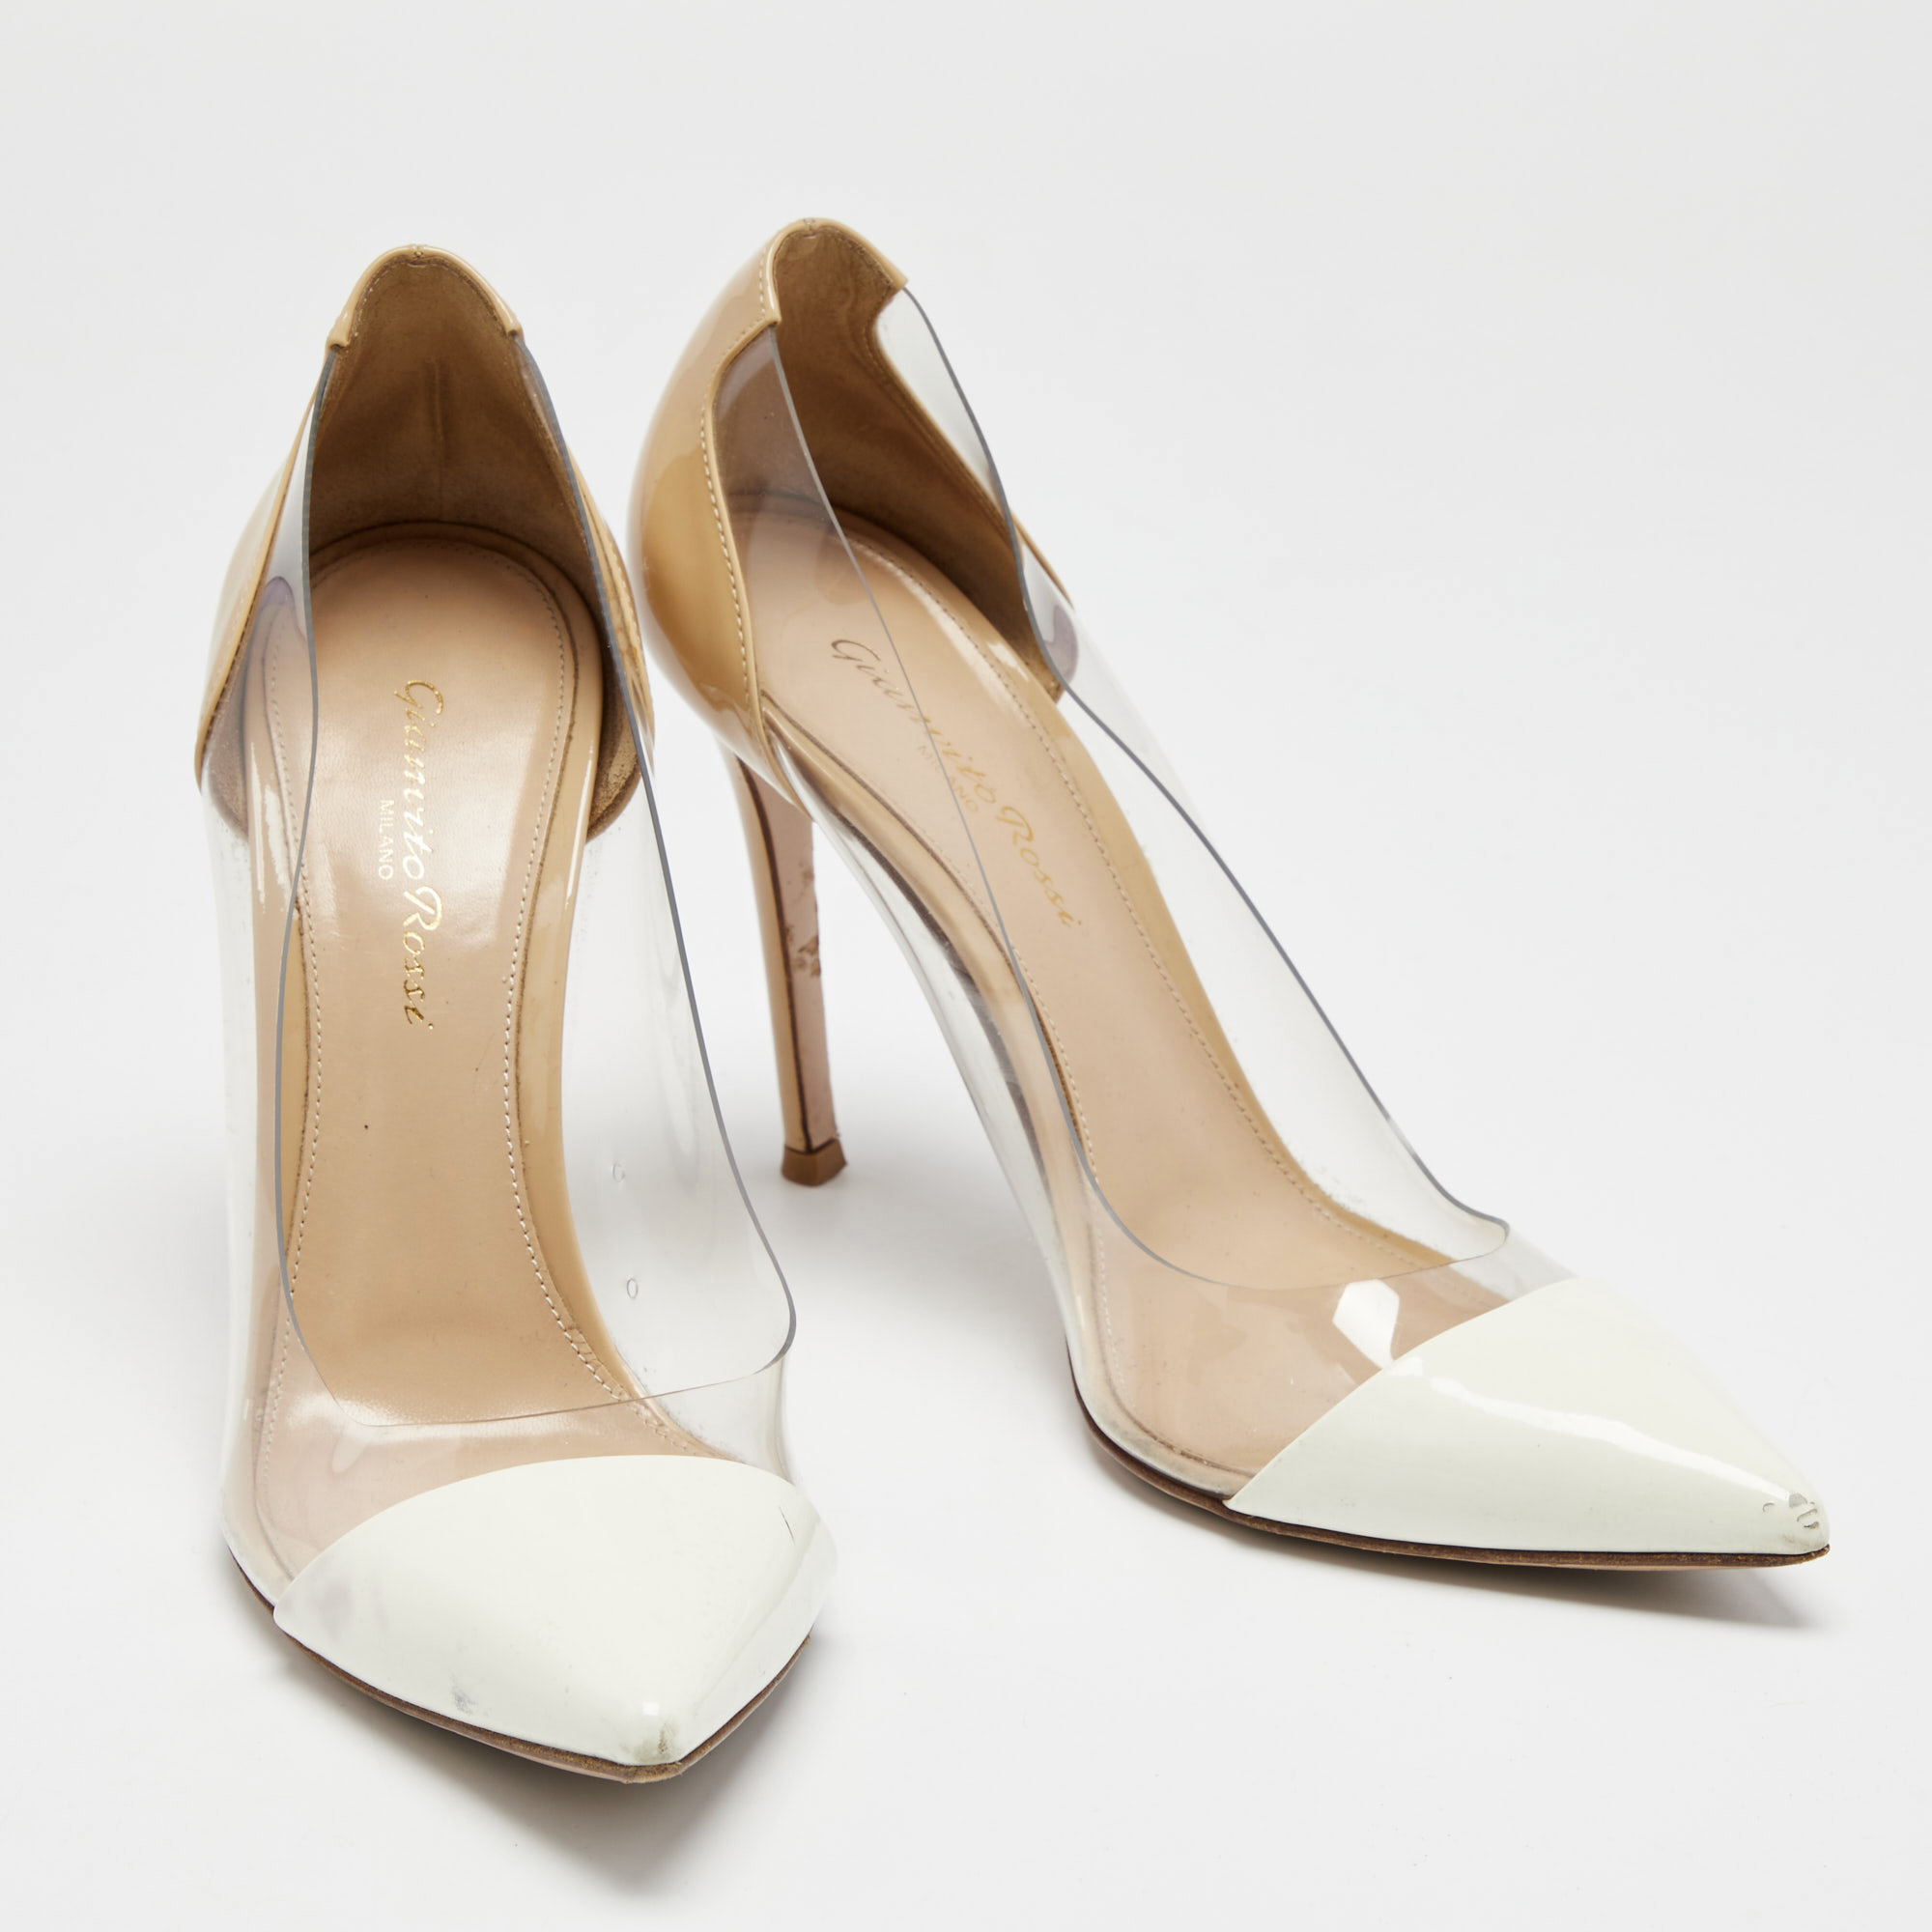 Gianvito Rossi Beige/White Patent Leather And PVC Plexi Pointed Toe Pumps Size 38